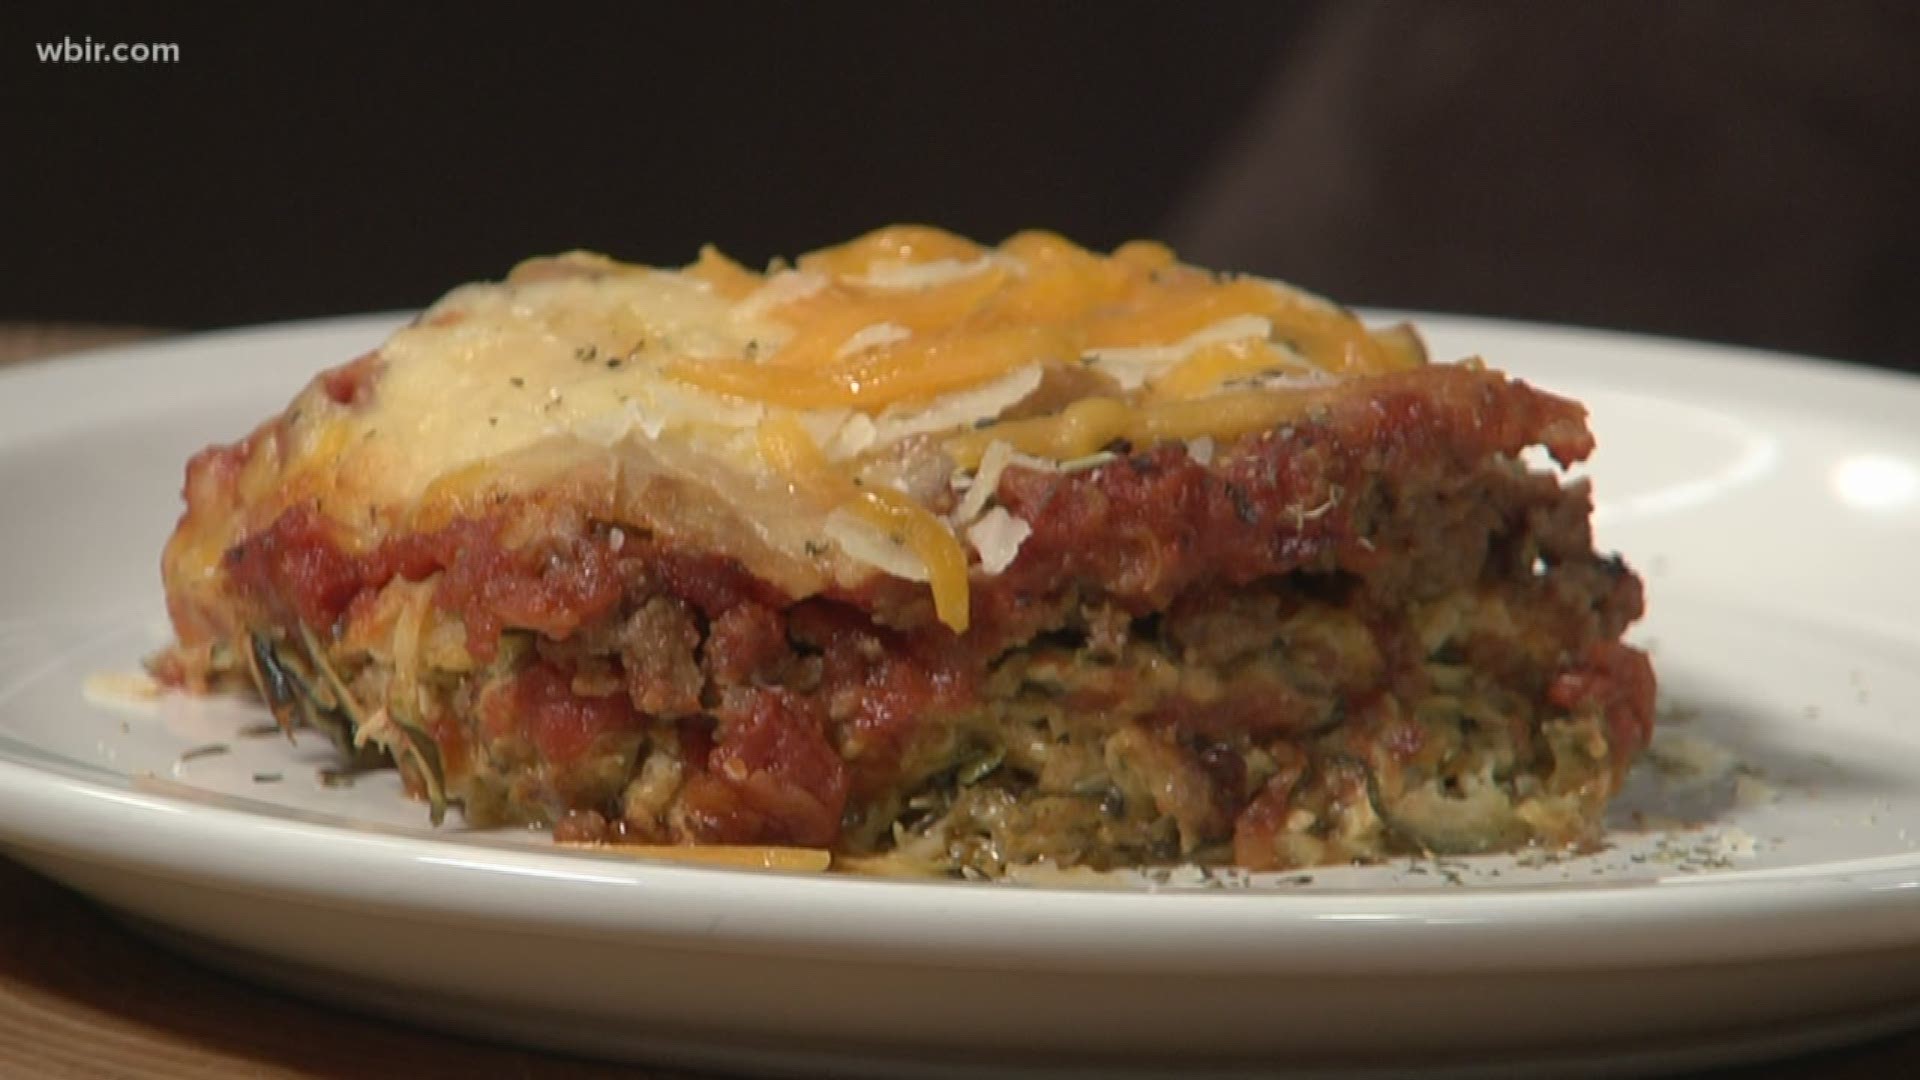 Melissa Graves shows us how to make Zucchini Pizza Casserole on "In the Kitchen."